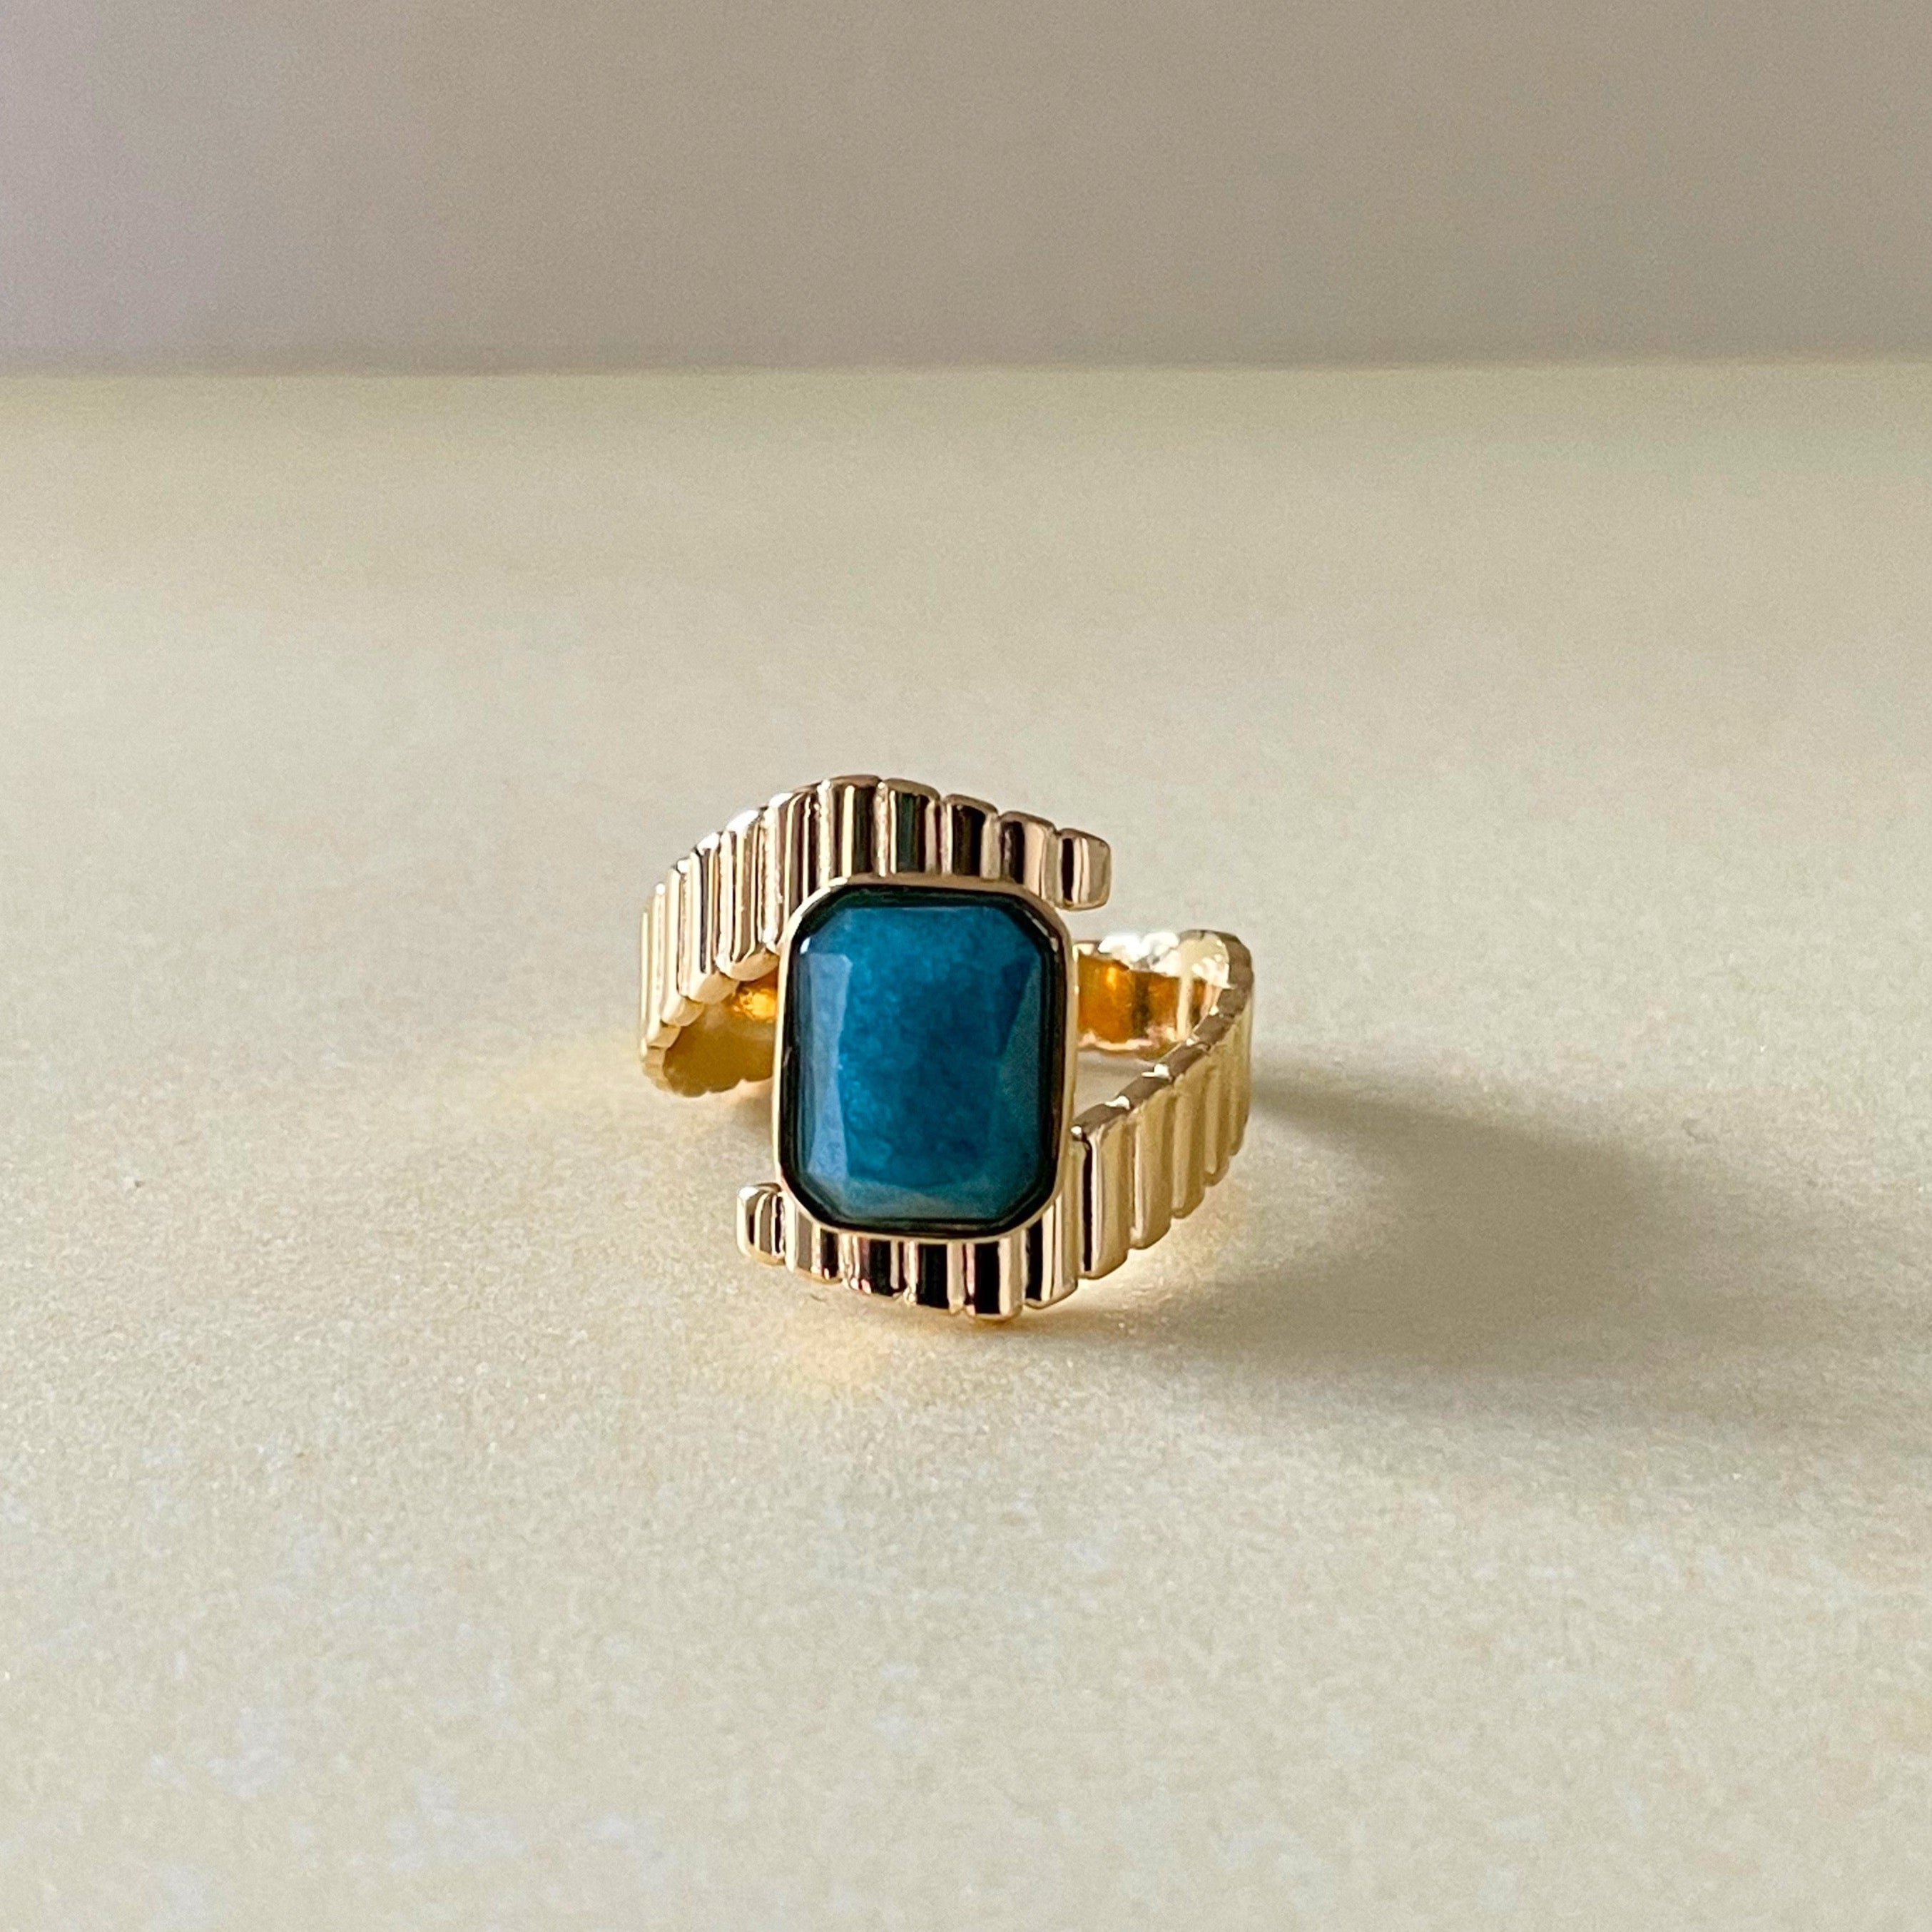 Riva Luxe 18k Gold Plated Apatite Stone Deco Ring